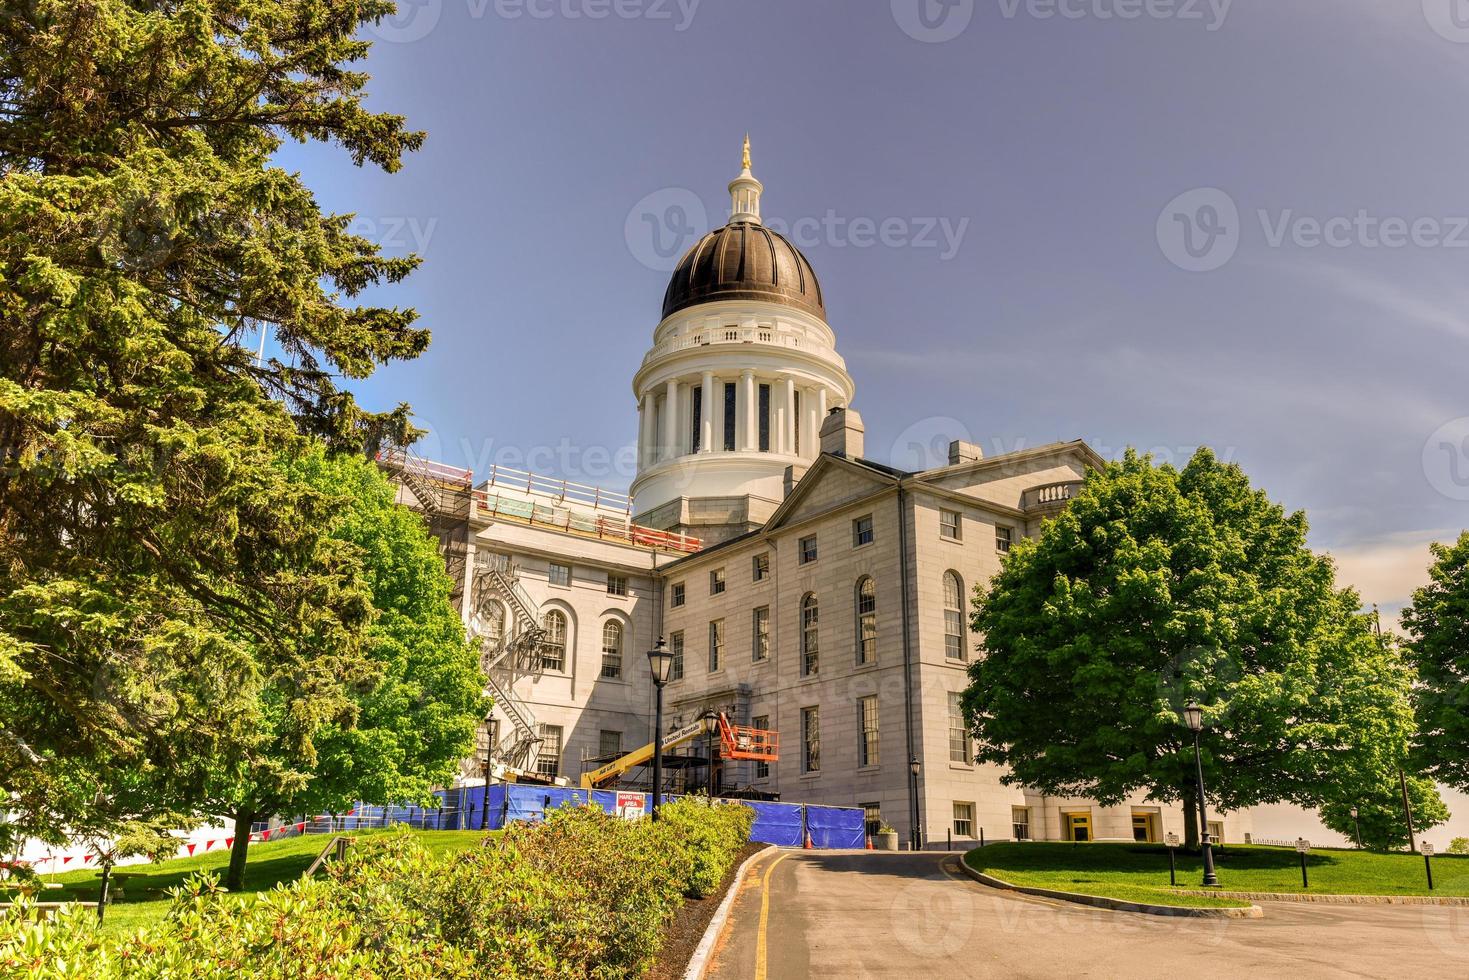 The Maine State House in Augusta, Maine is the state capitol of the State of Maine. The building was completed in 1832, one year after Augusta became the capital of Maine. photo